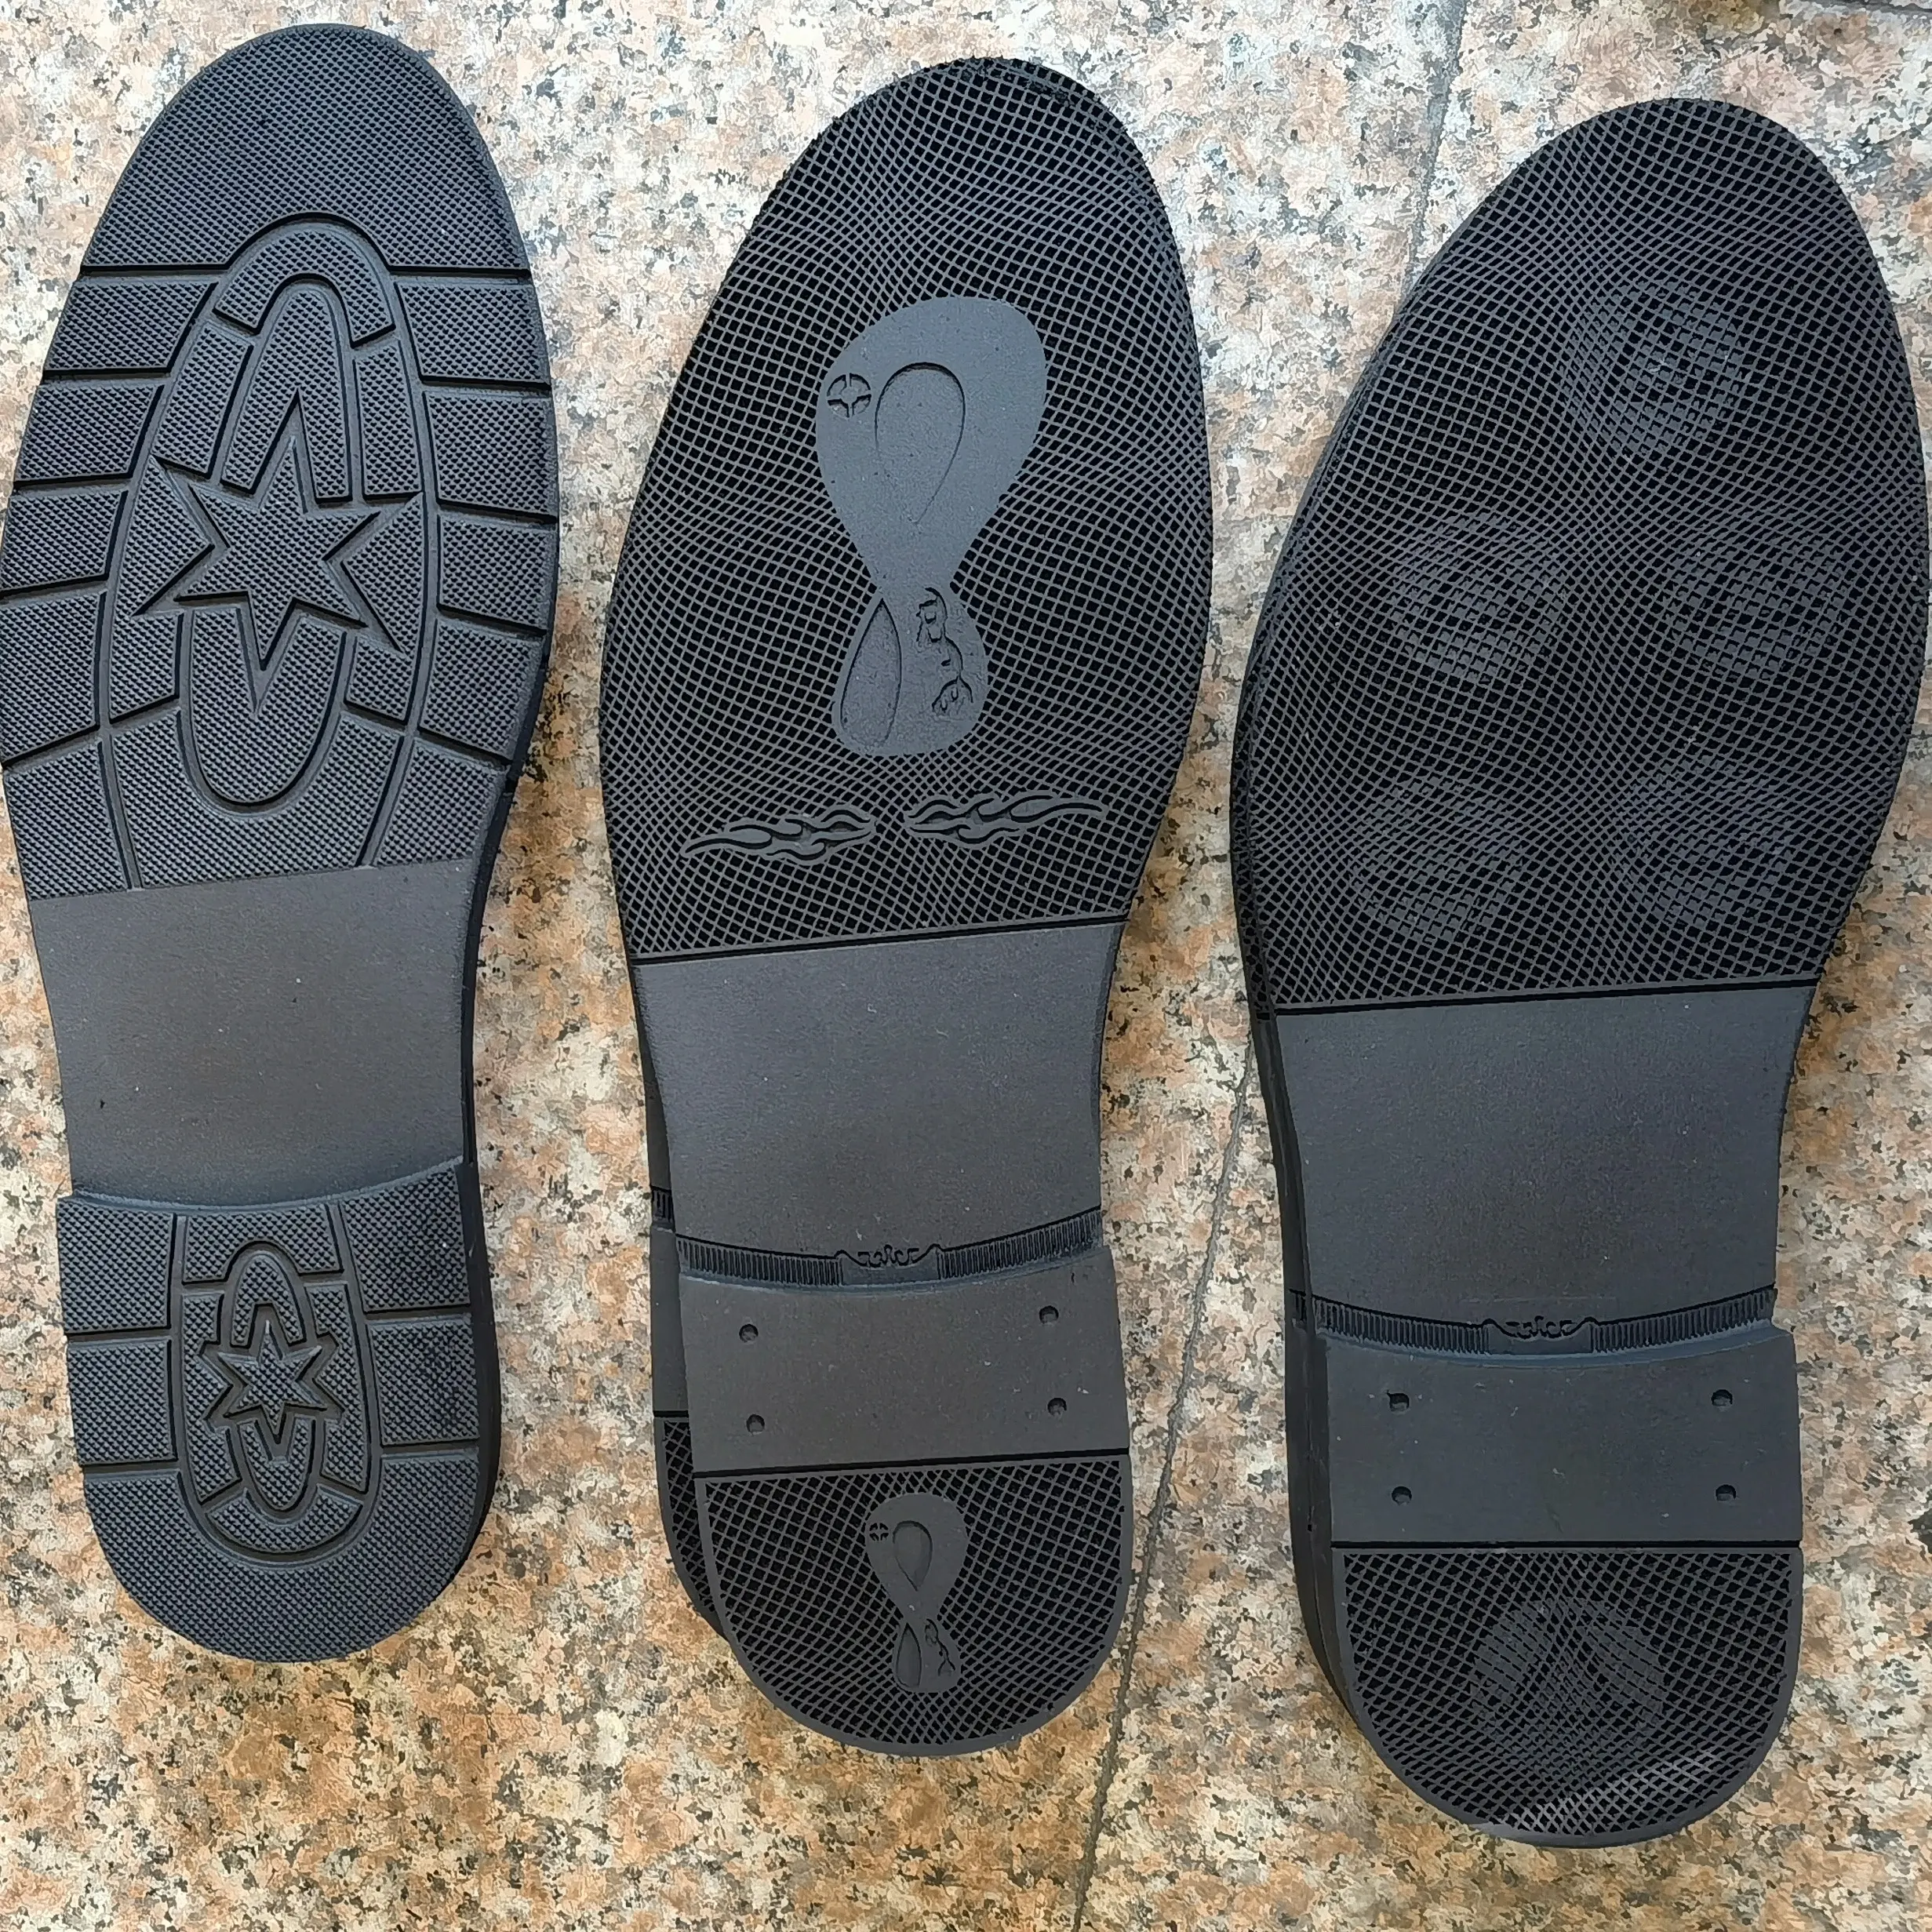 Tianmin Hot Selling Safety Shoes Suppliers For Boots Rubber Outsole Size With Low Price